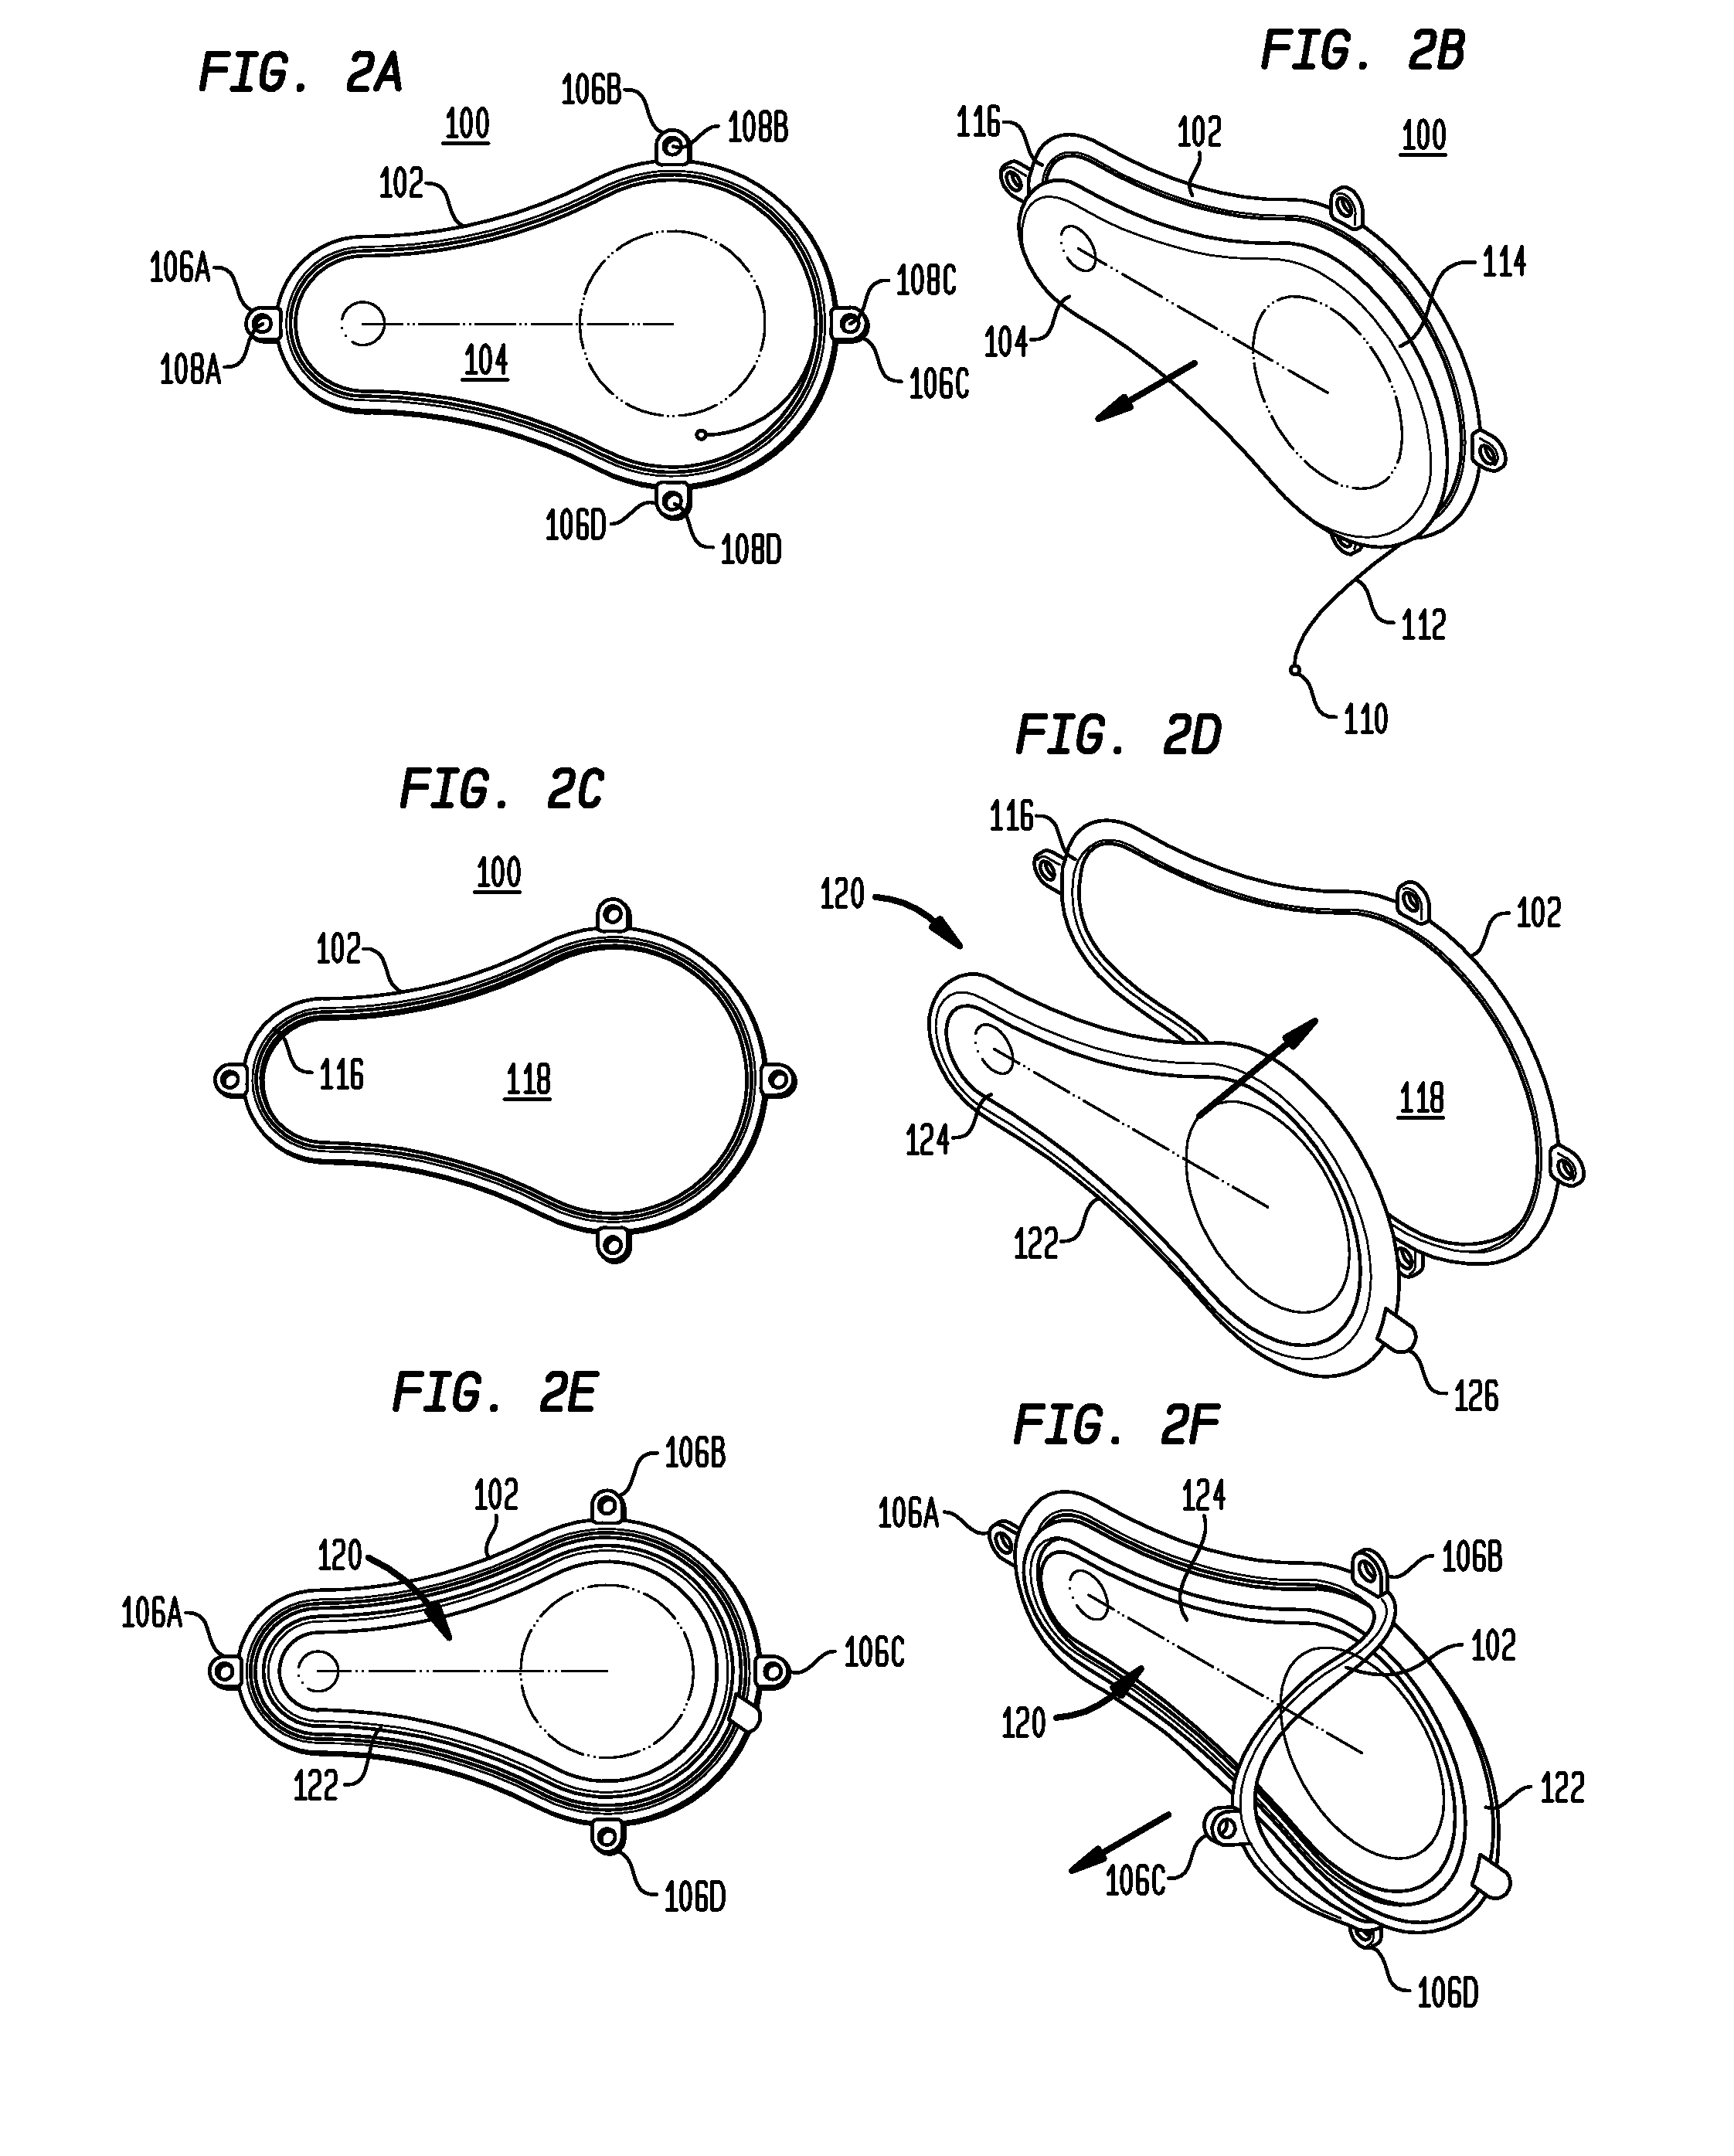 Self-locating, multiple application, and multiple location medical patch systems and methods therefor